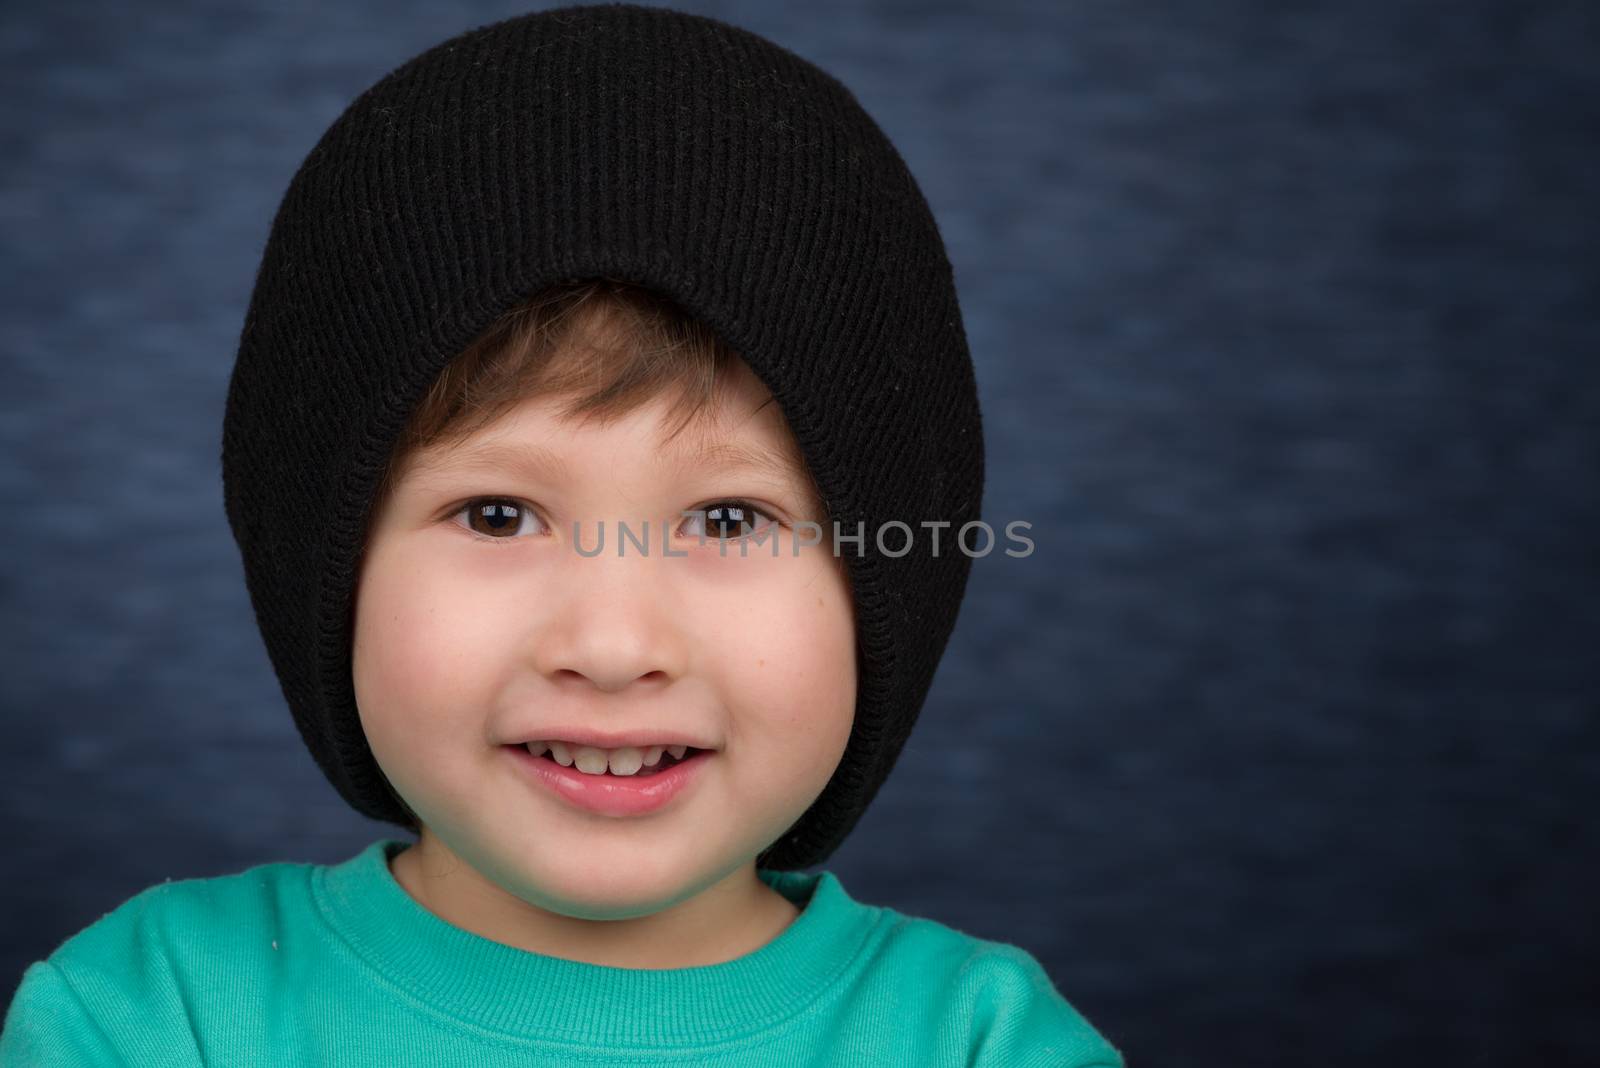 A smiling young boy wearing a knit winter hat.